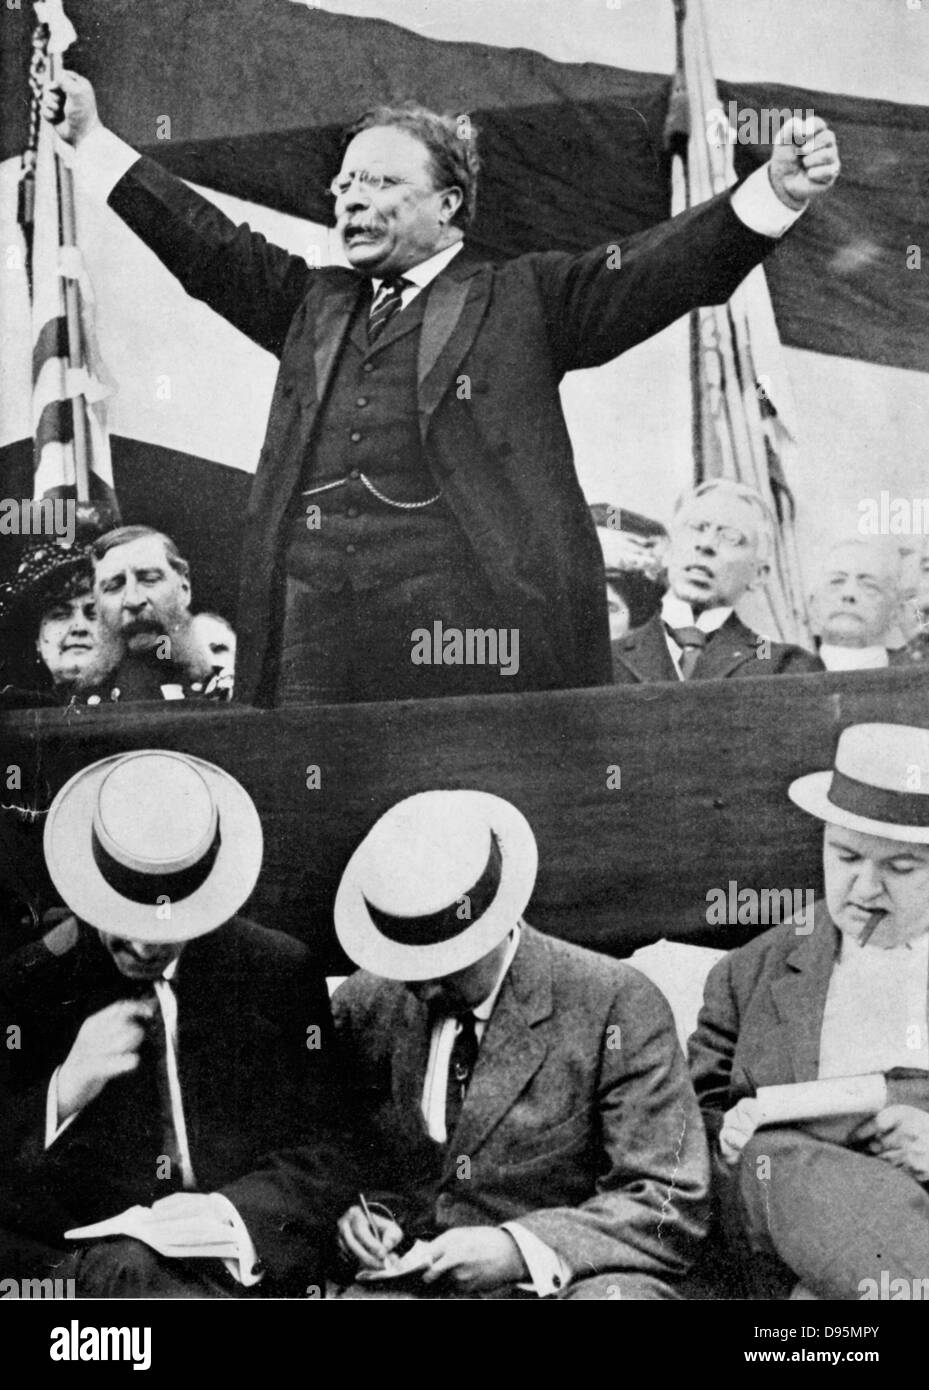 Theodore Roosevelt (1858-1919) President of USA 1901-1912 making a speech. In foreground, reporters are making notes. Stock Photo